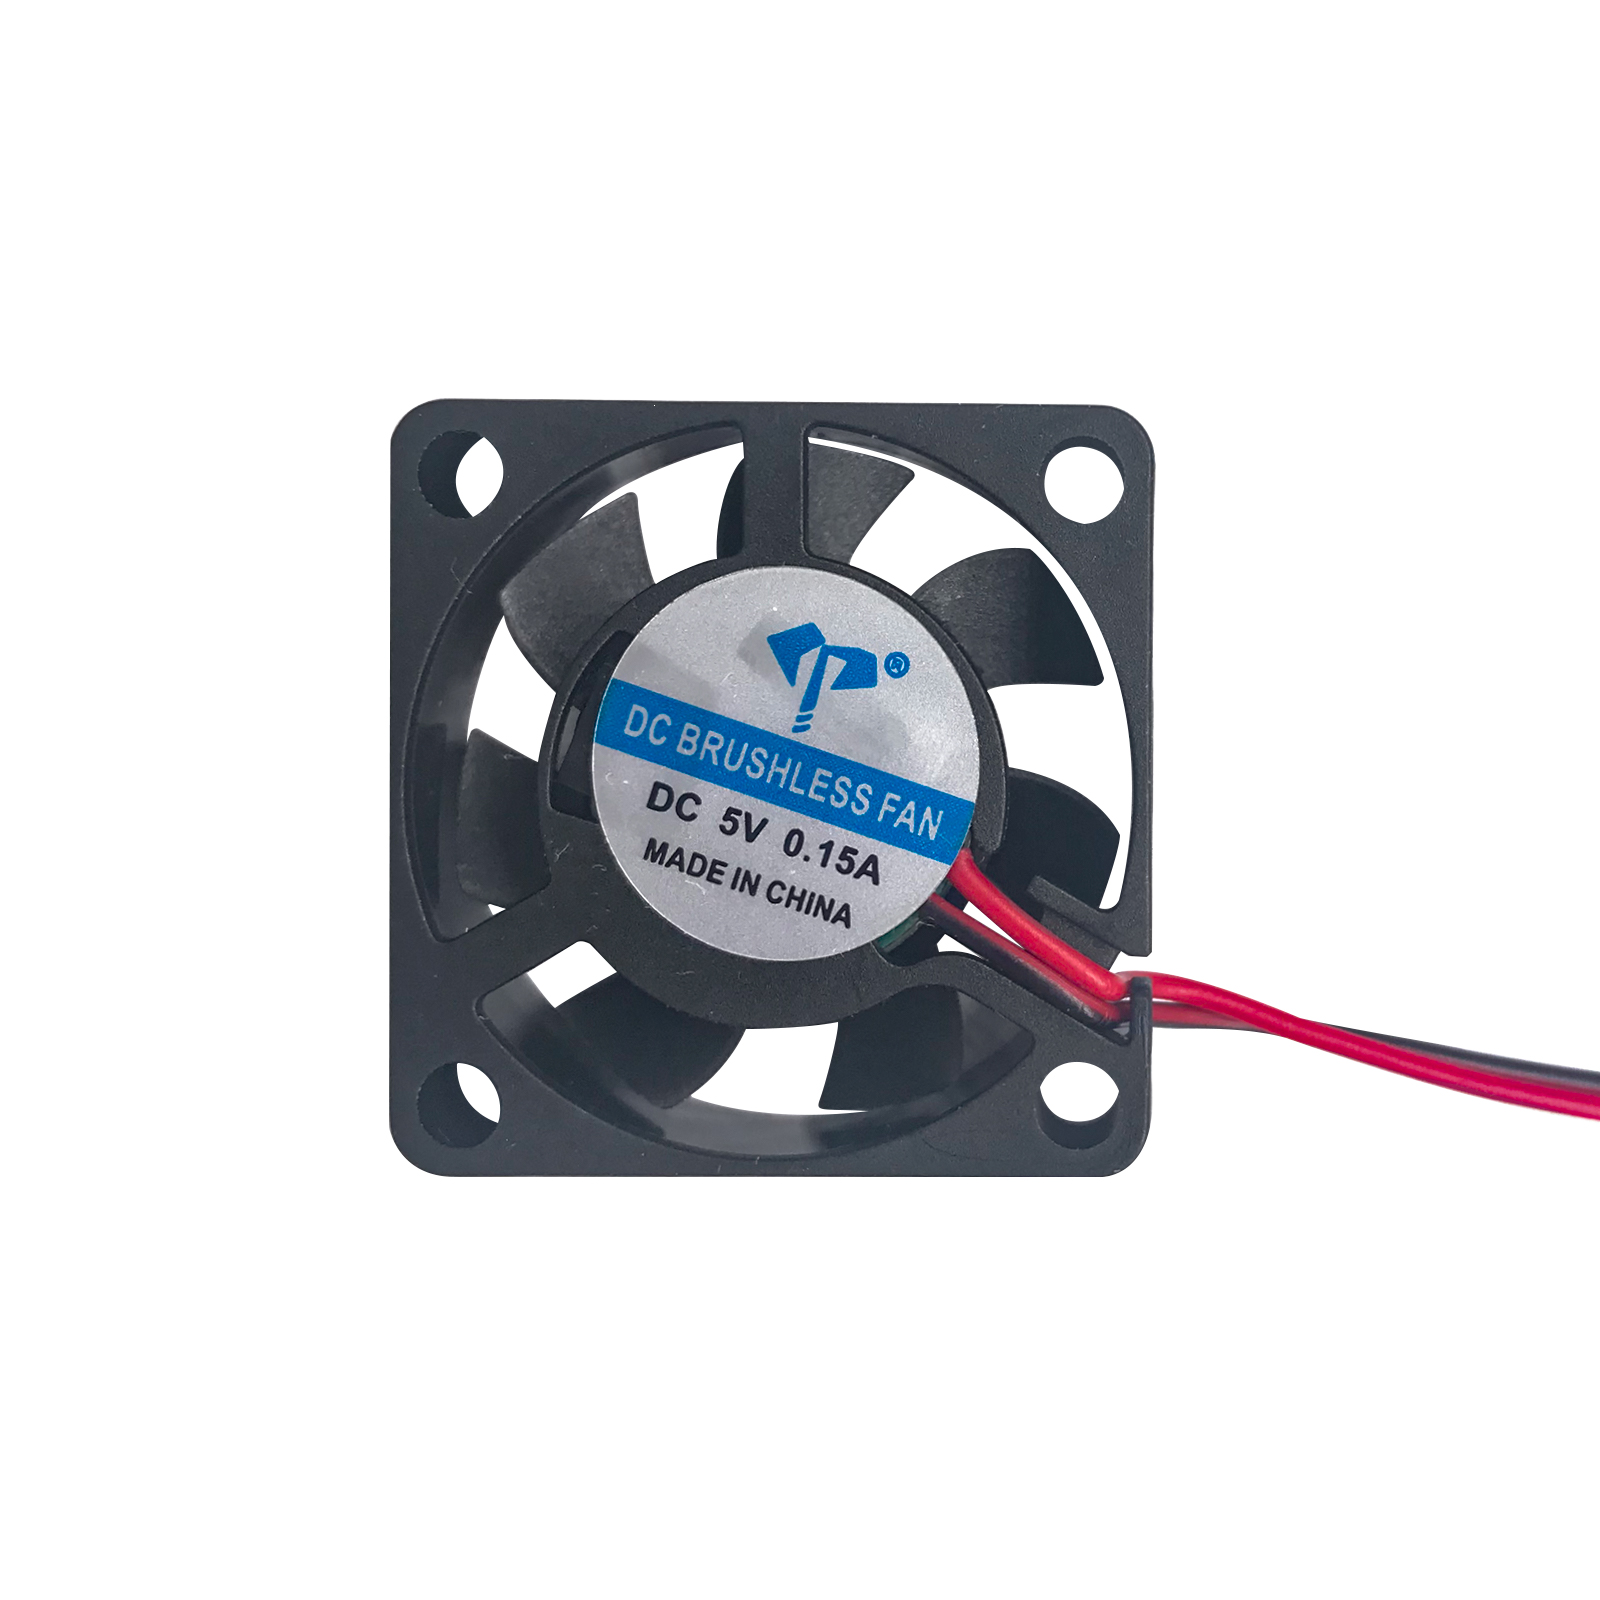 3007-DC5V-2Pin-254-Cooling-Fan-for-Voron001-3D-Printer-Accessories-1952413-2